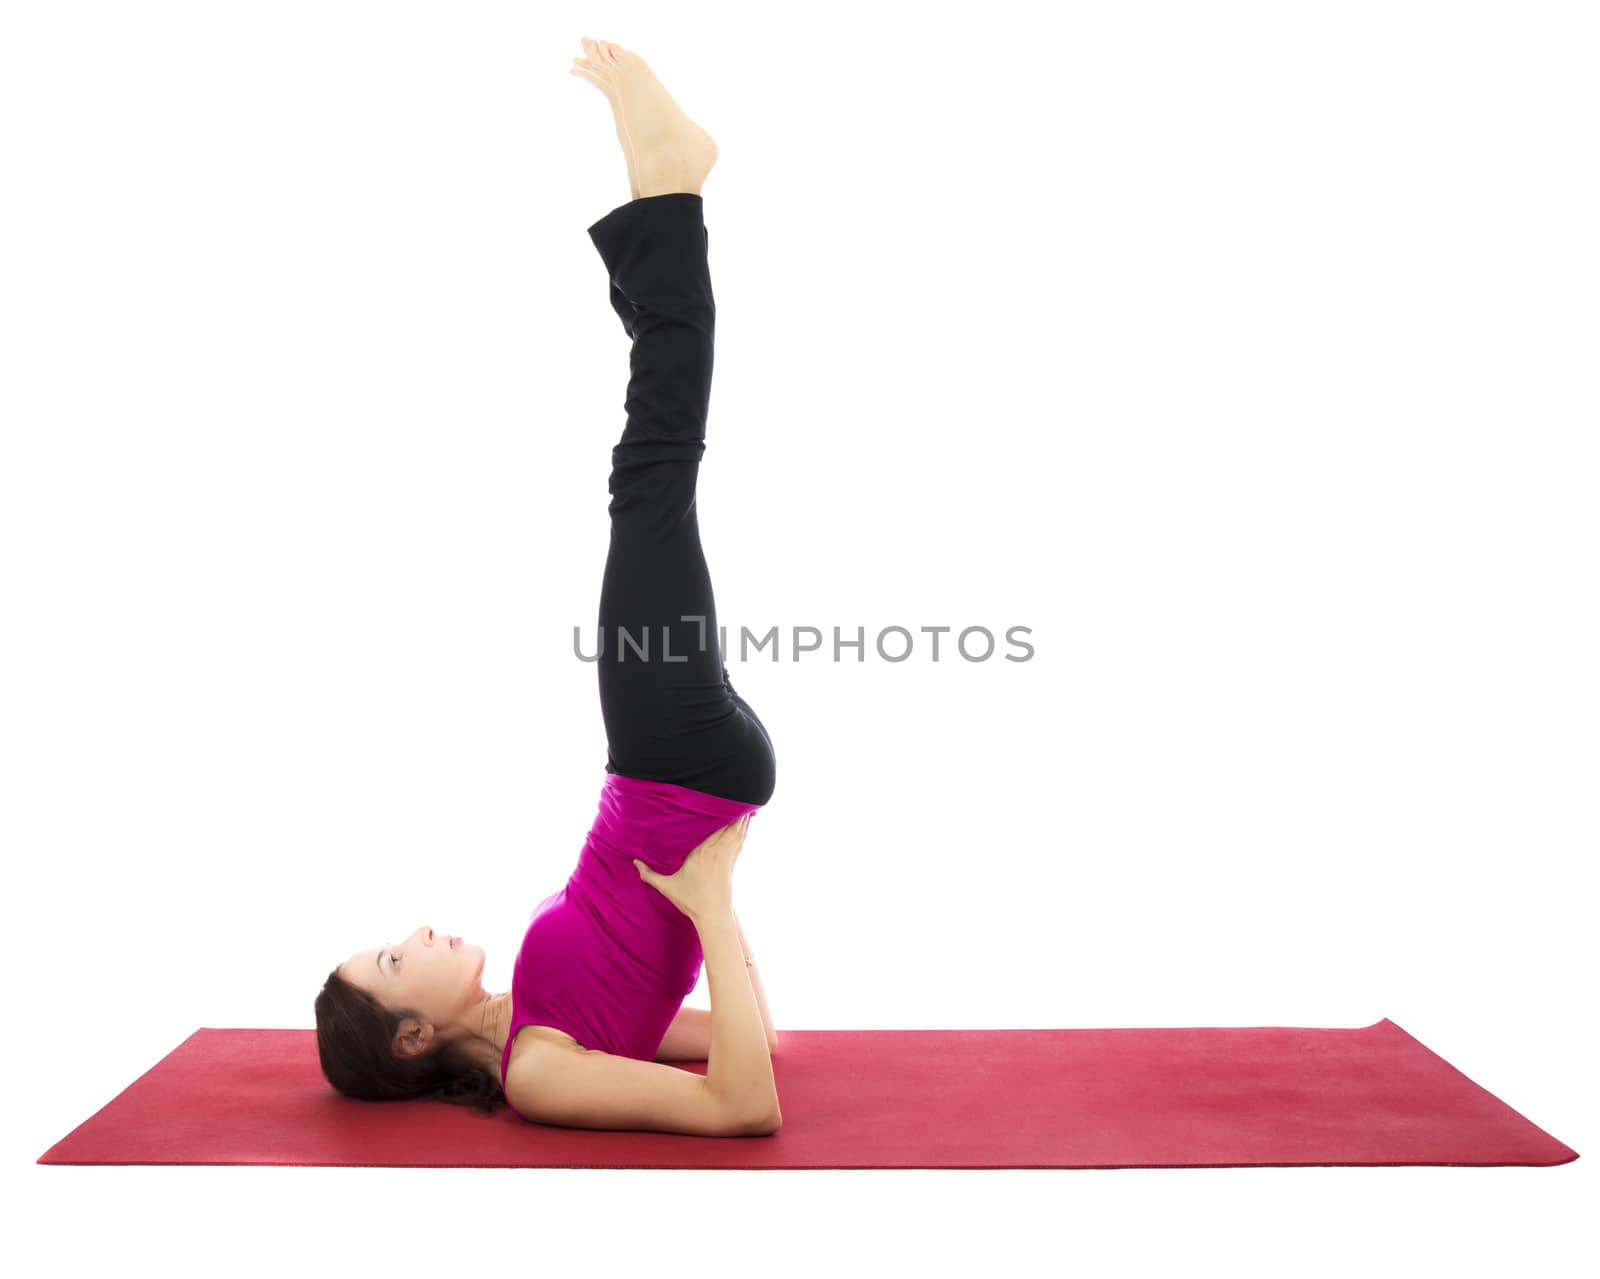 Woman doing Supported Shoulder Stand during Yoga or Pilates (Series with the same model available)